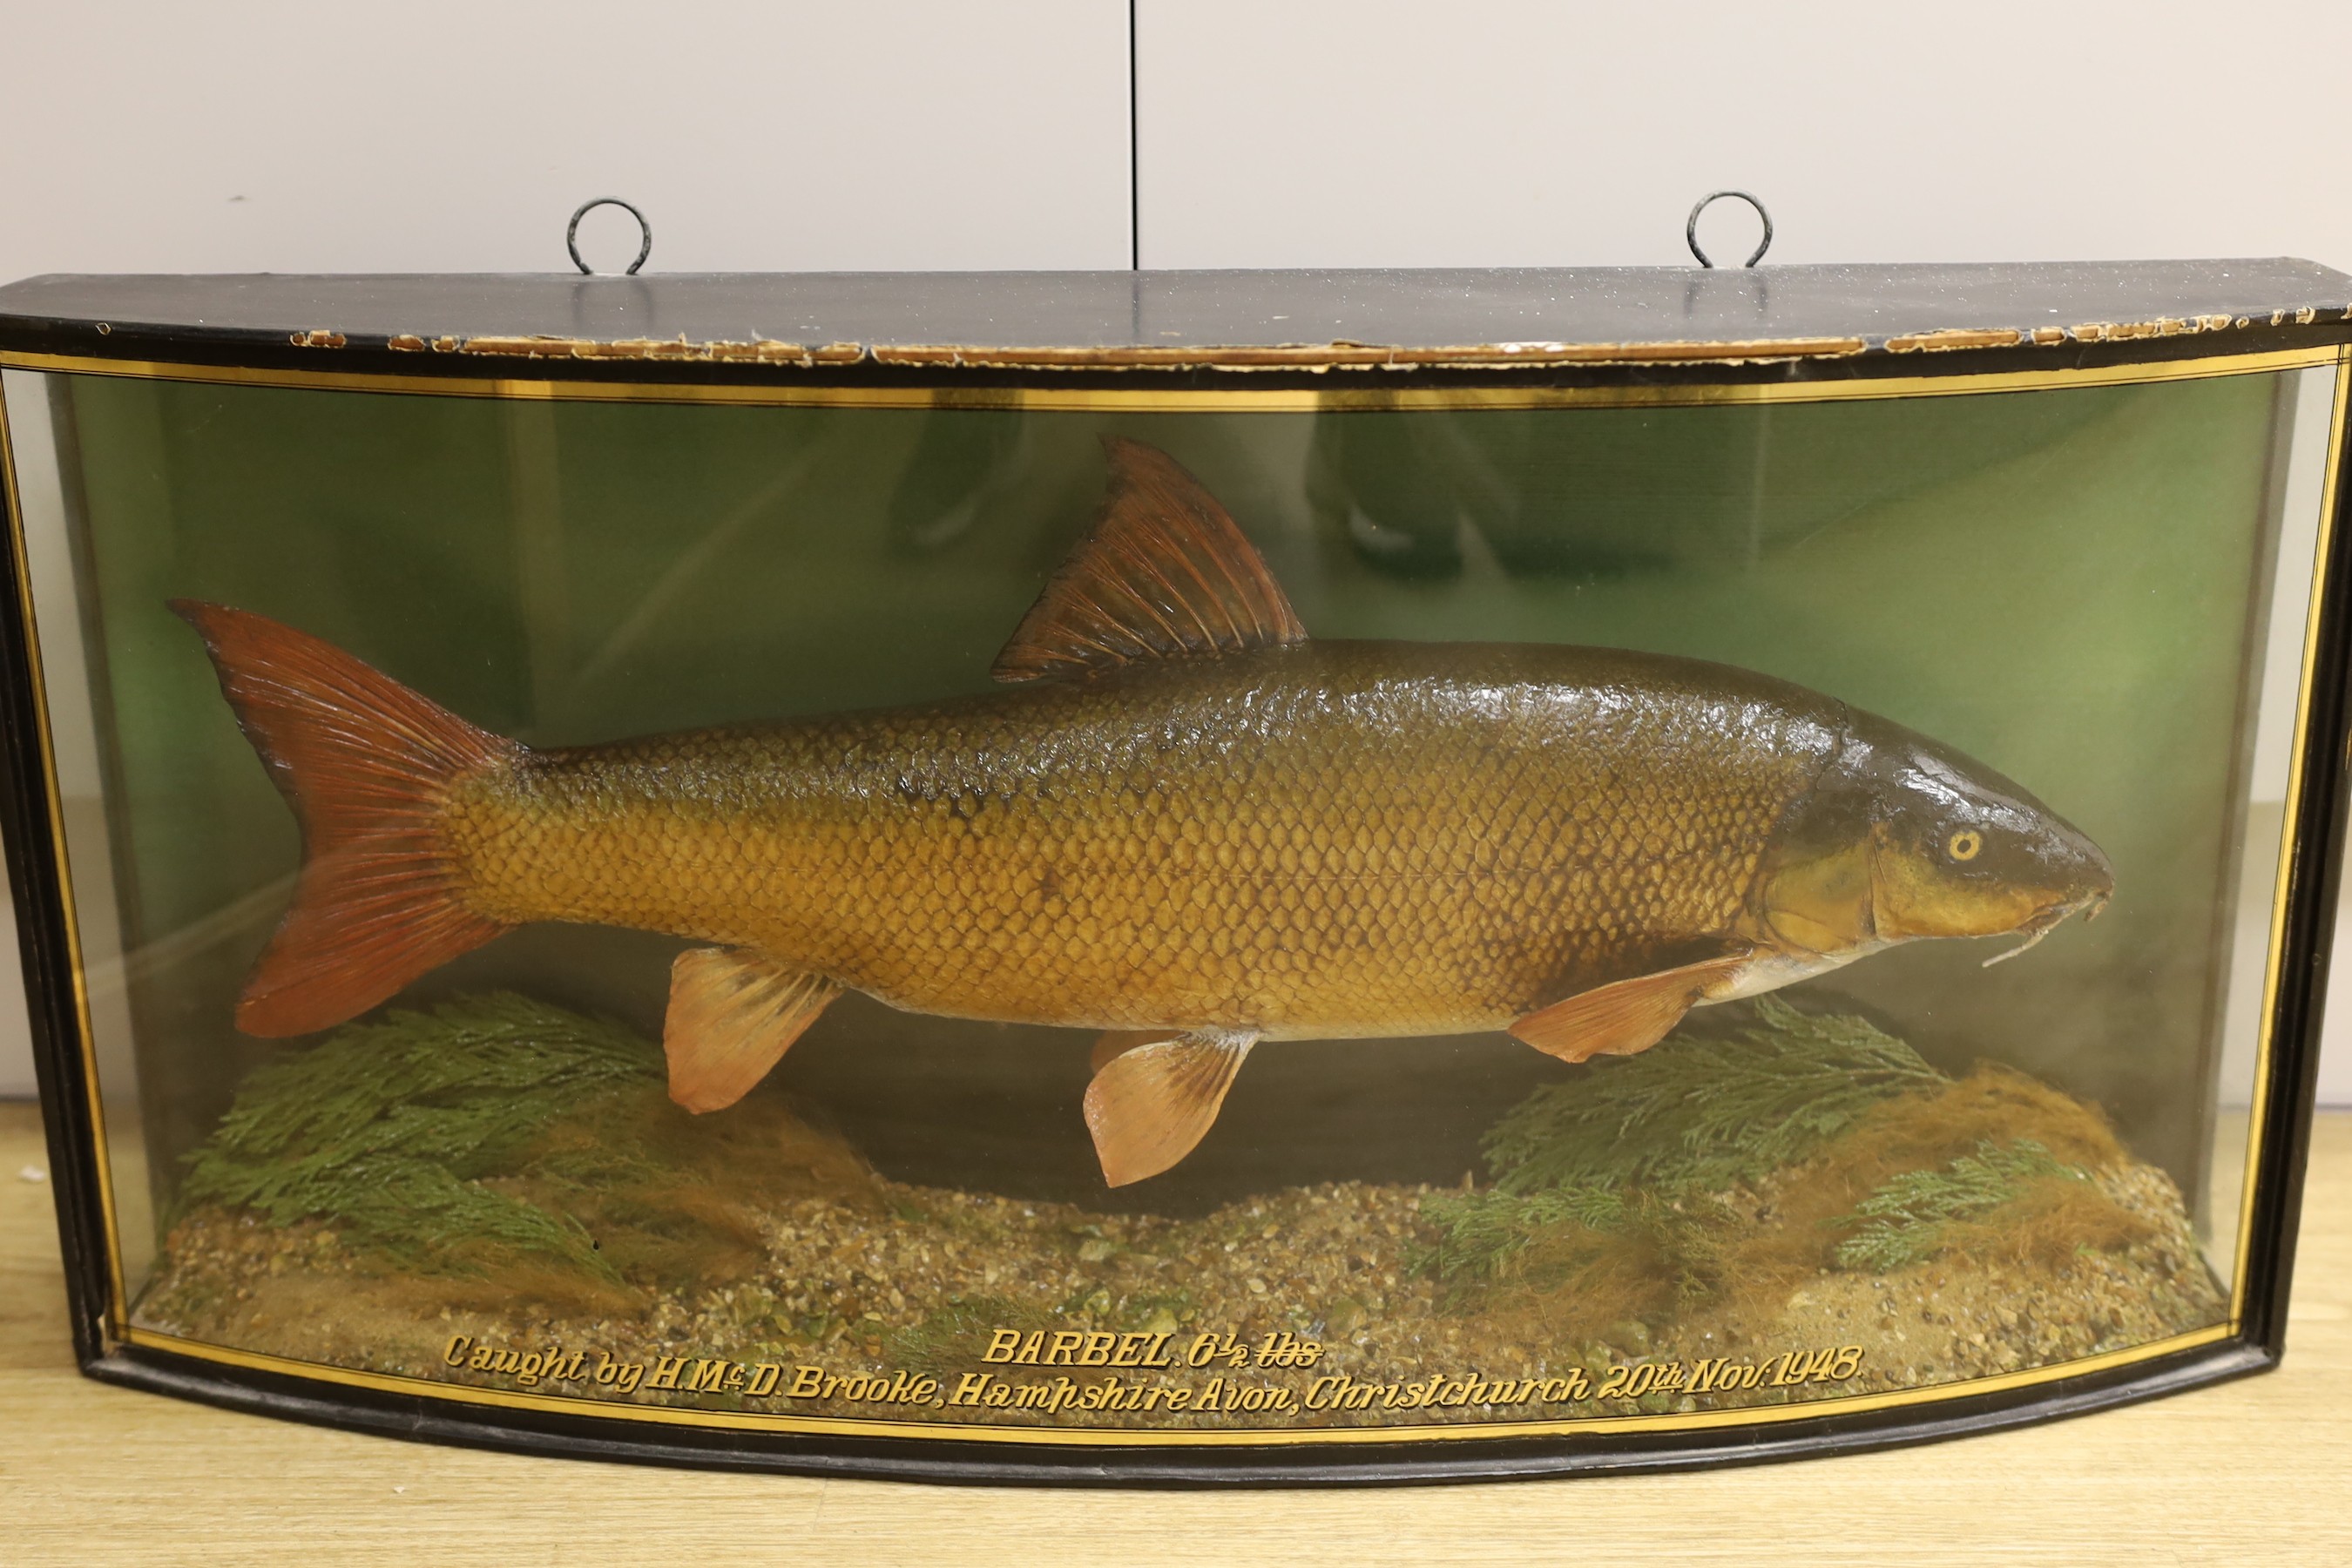 A cased taxidermic barbel, 1948, caught by H. Mc.D Brooke, Christchurch, preserved by J. Cooper & Son, Hounslow